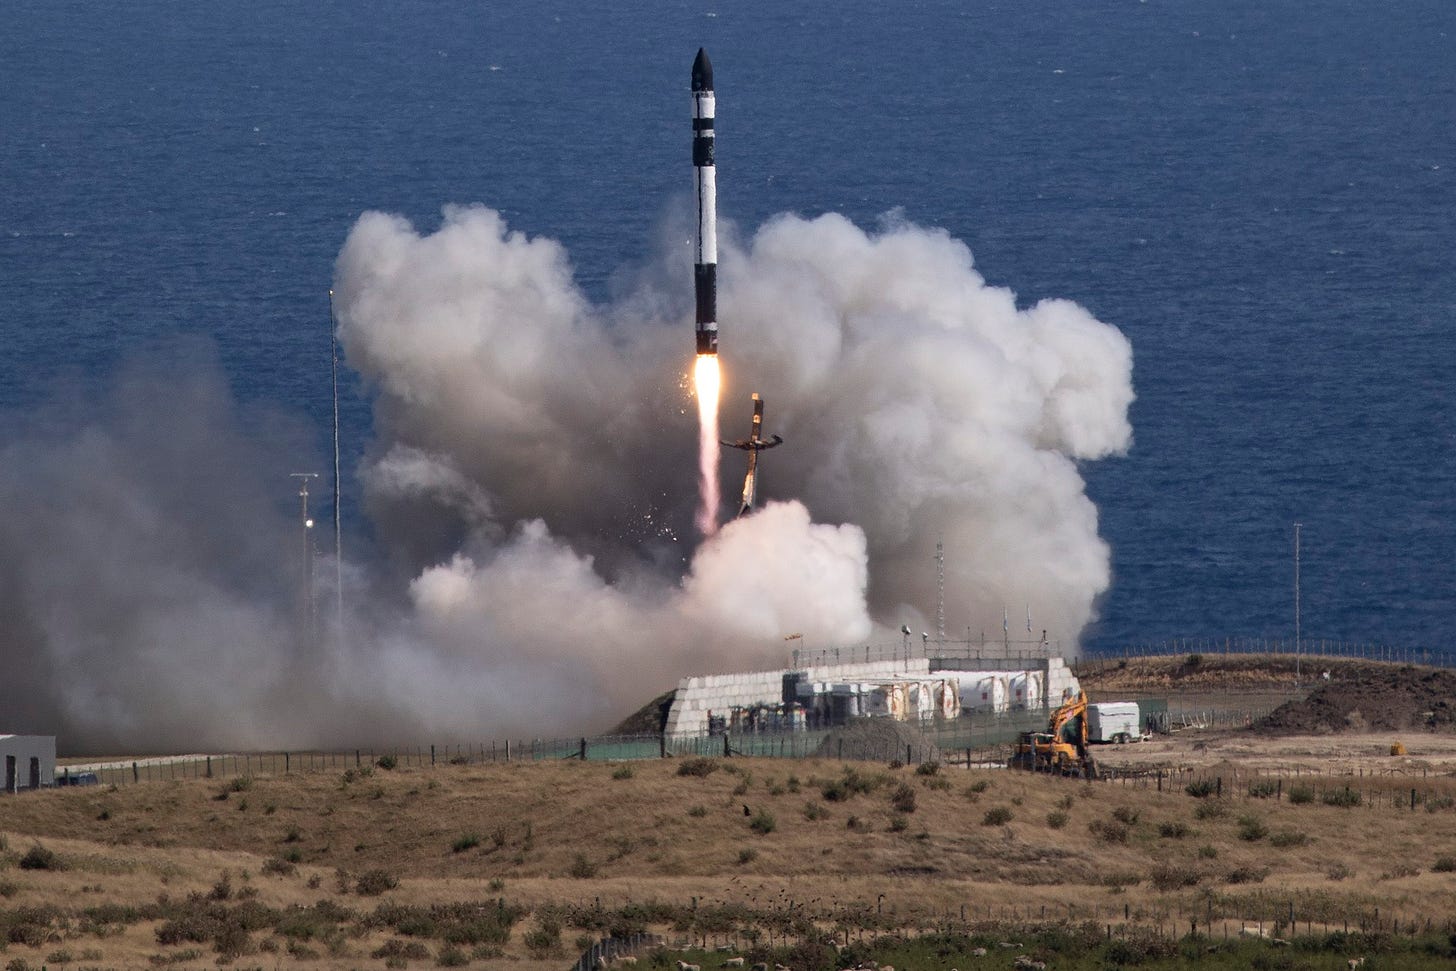 A National Reconnaissance Office (NRO) payload was successfully launched aboard a Rocket Lab Electron rocket from Launch Complex-1 (Image credit: Scott Andrews)